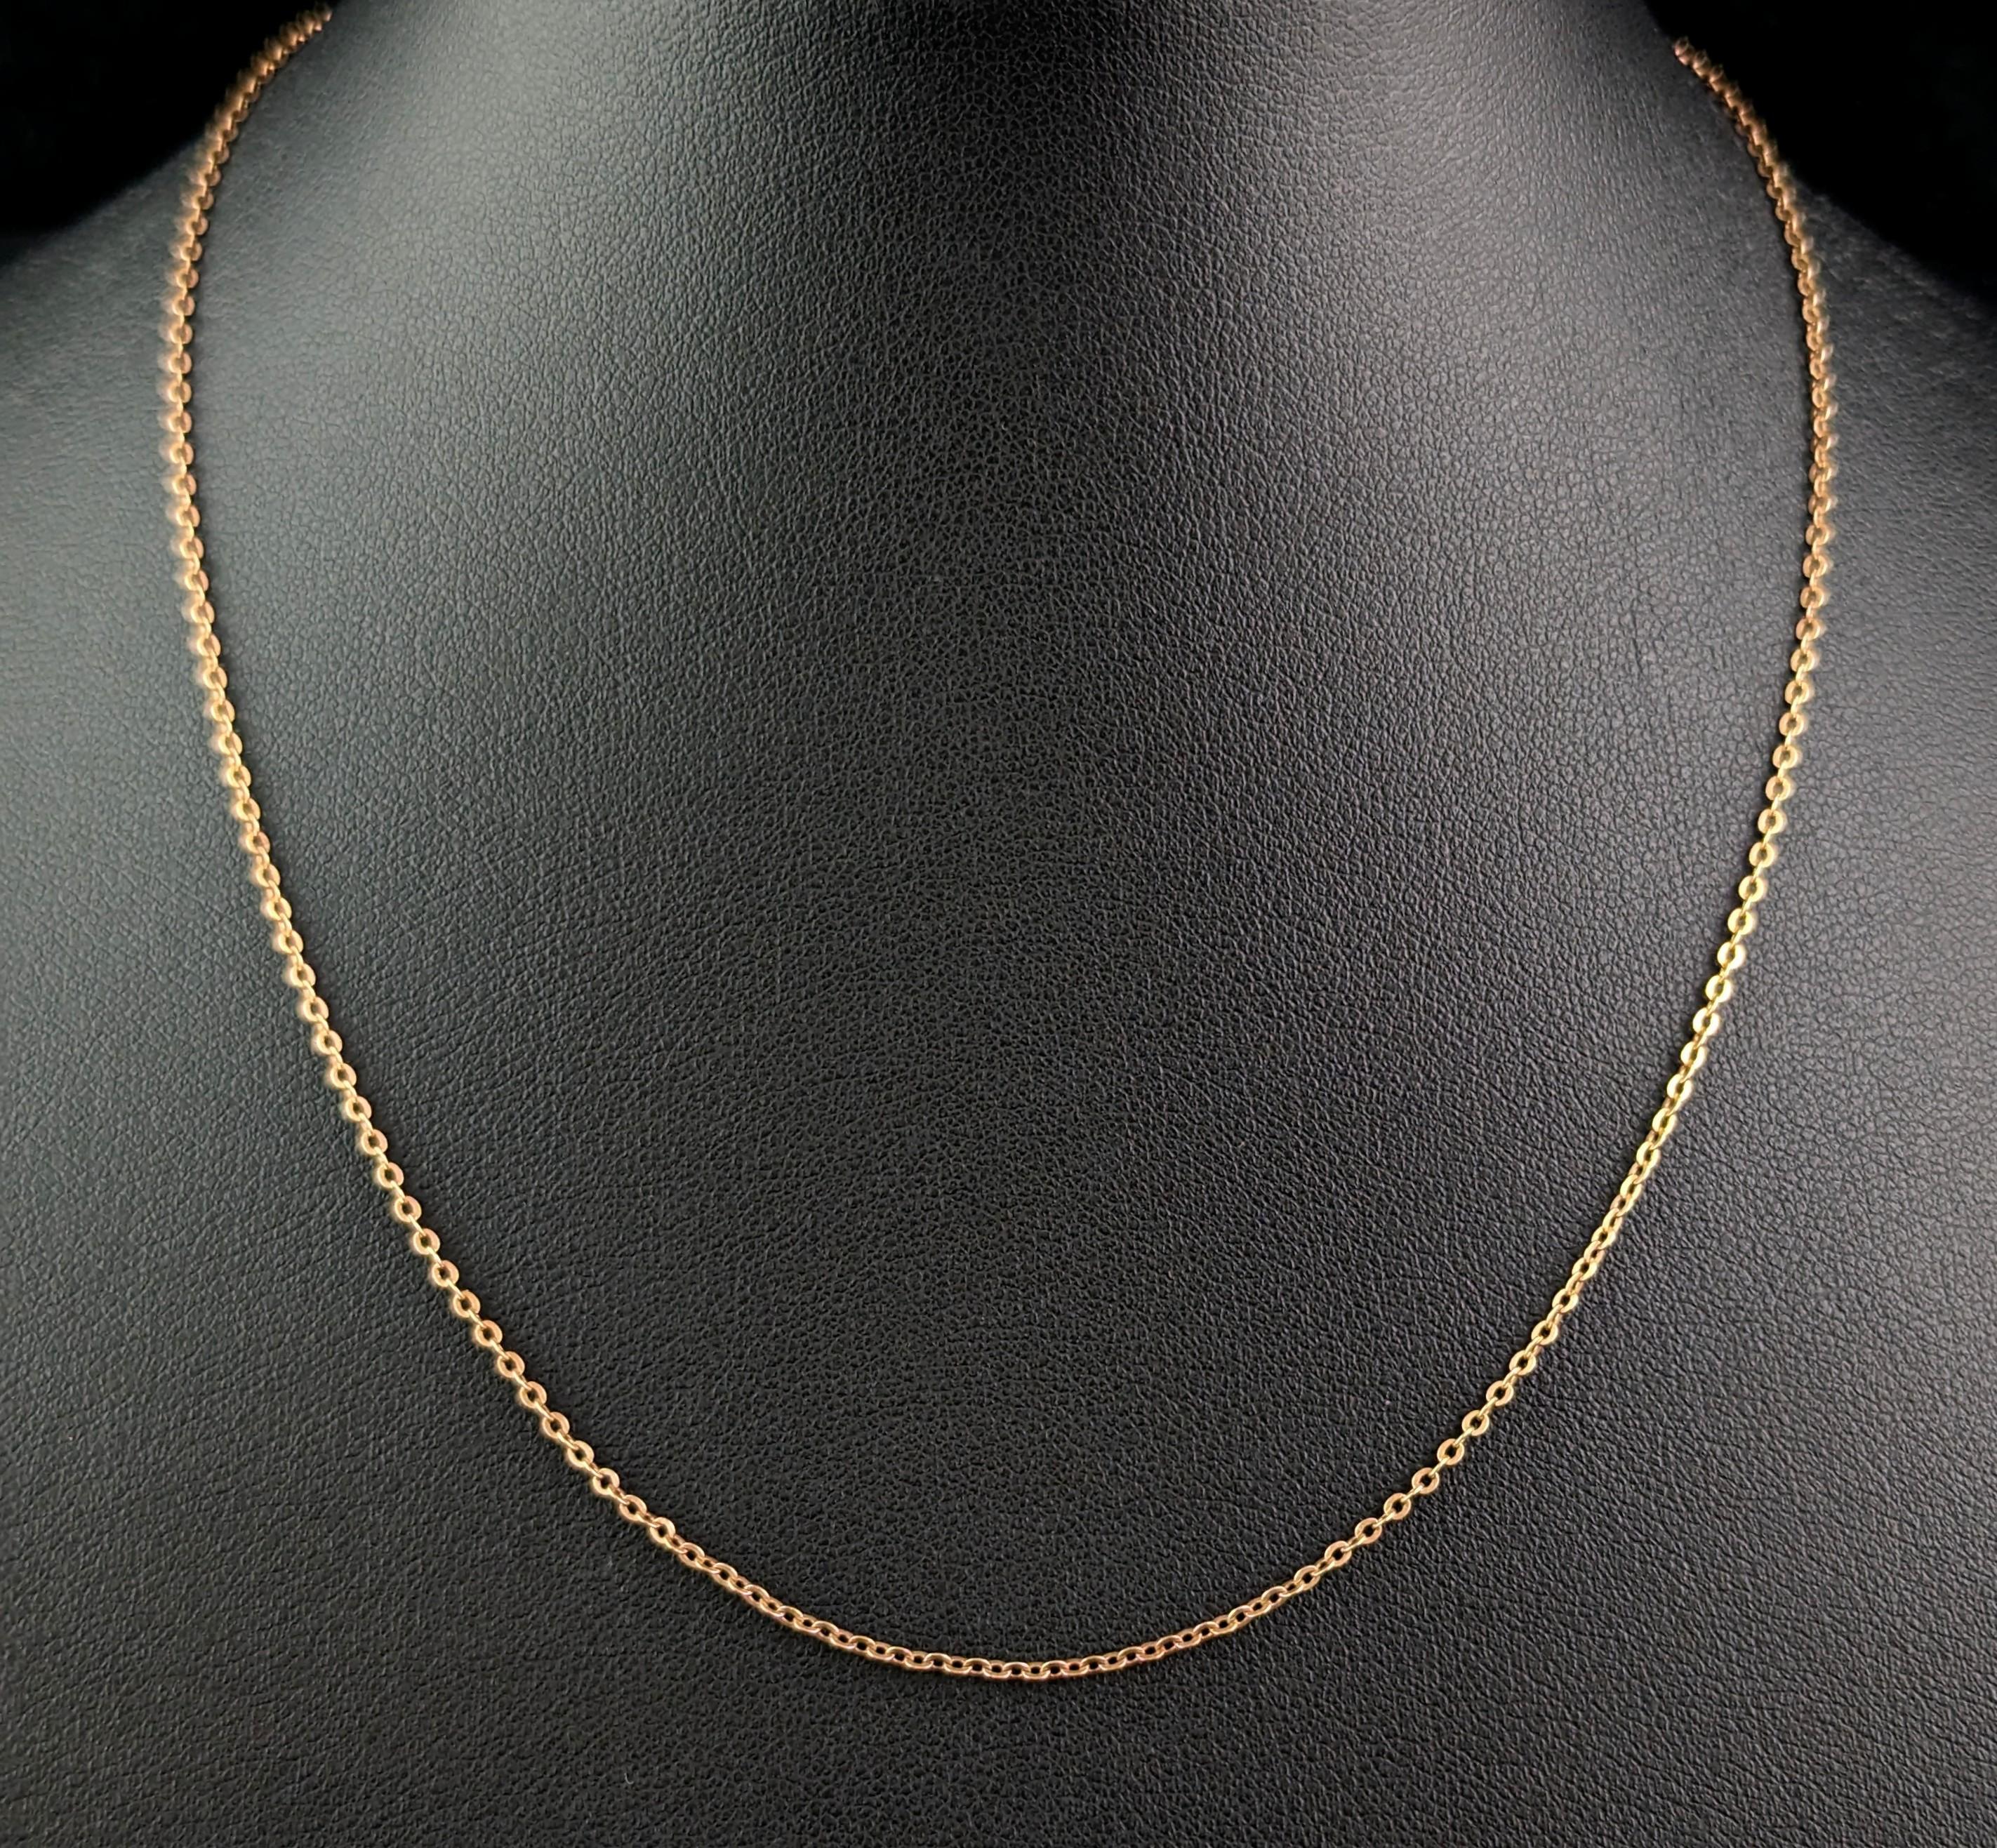 A fine dainty antique 9ct gold trace chain such as this is the perfect accompaniment to your favourite small lockets, pendants and charms.

It is a fine rolo trace link in a rich yellow gold with a spring ring clasp.

It is a good length and will